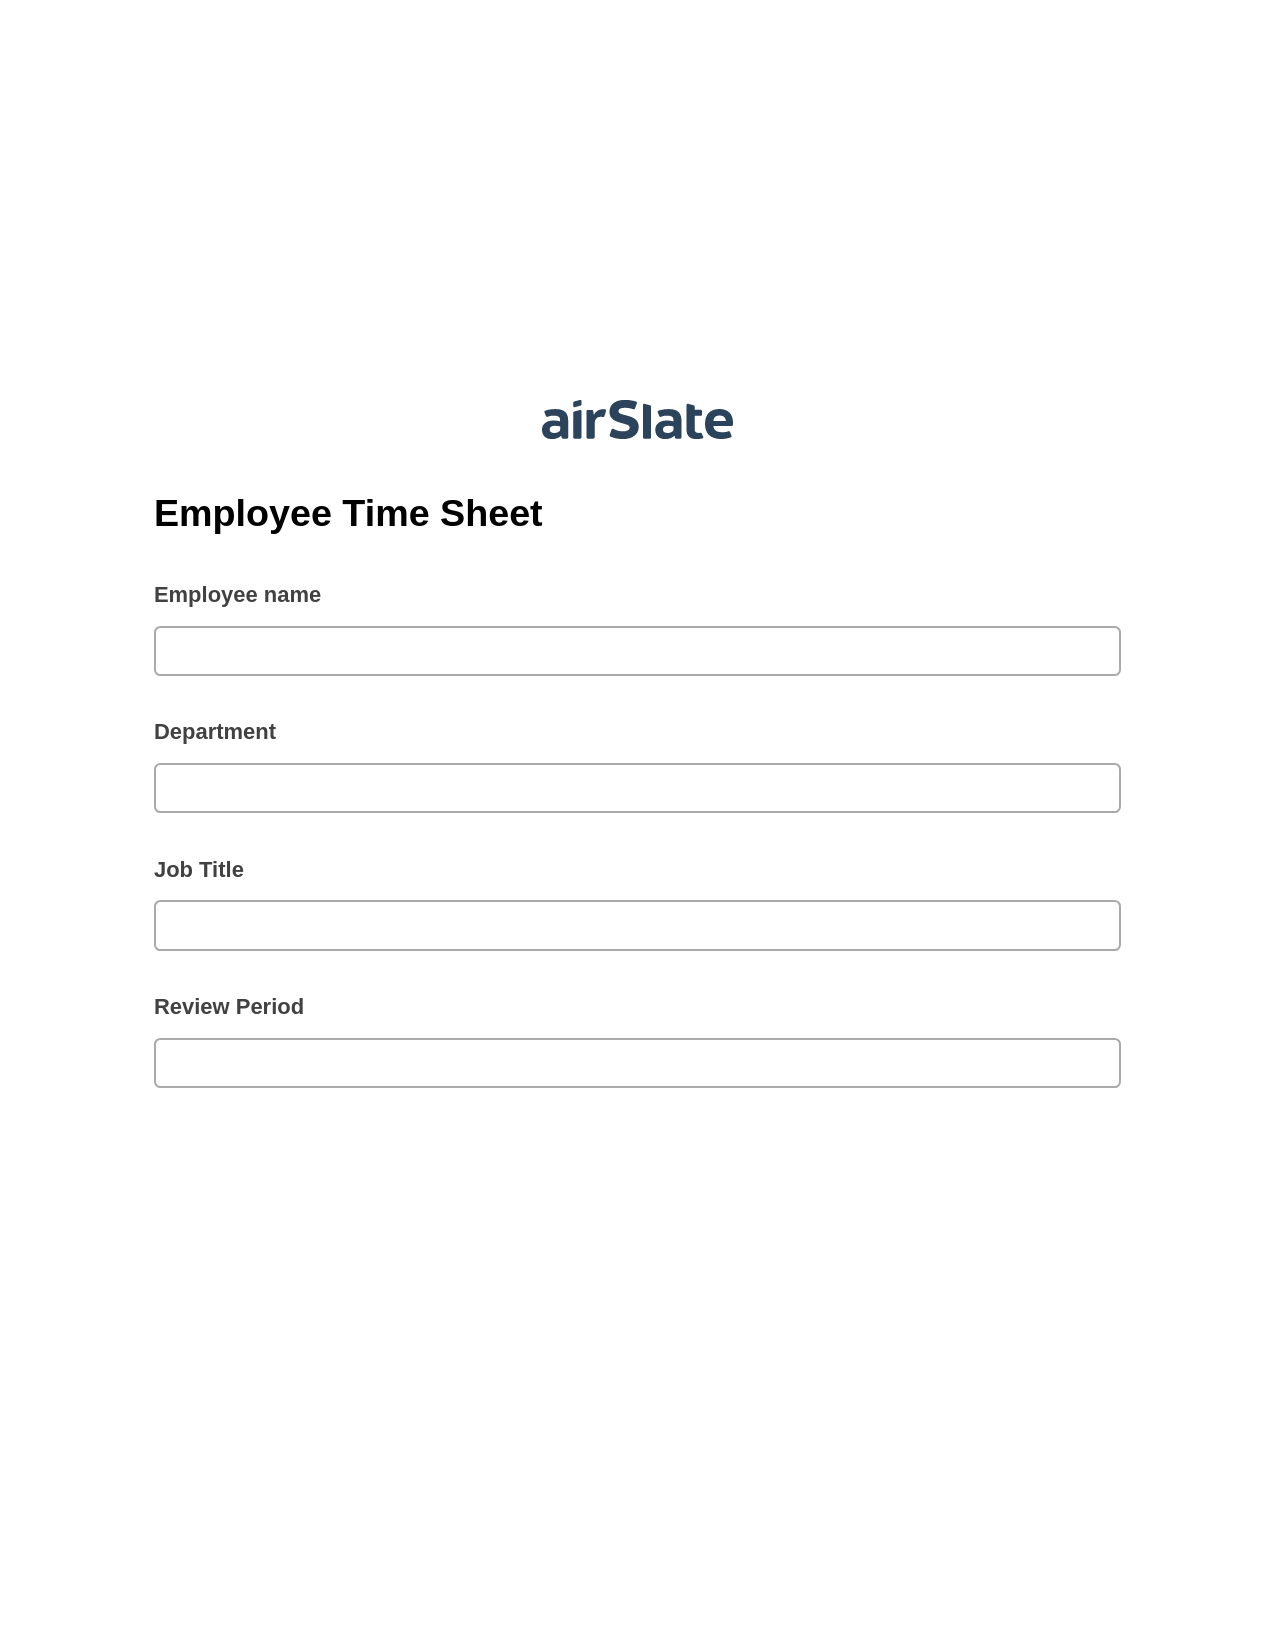 Employee Time Sheet Pre-fill from Excel Spreadsheet Bot, Update Audit Trail Bot, Export to Salesforce Record Bot